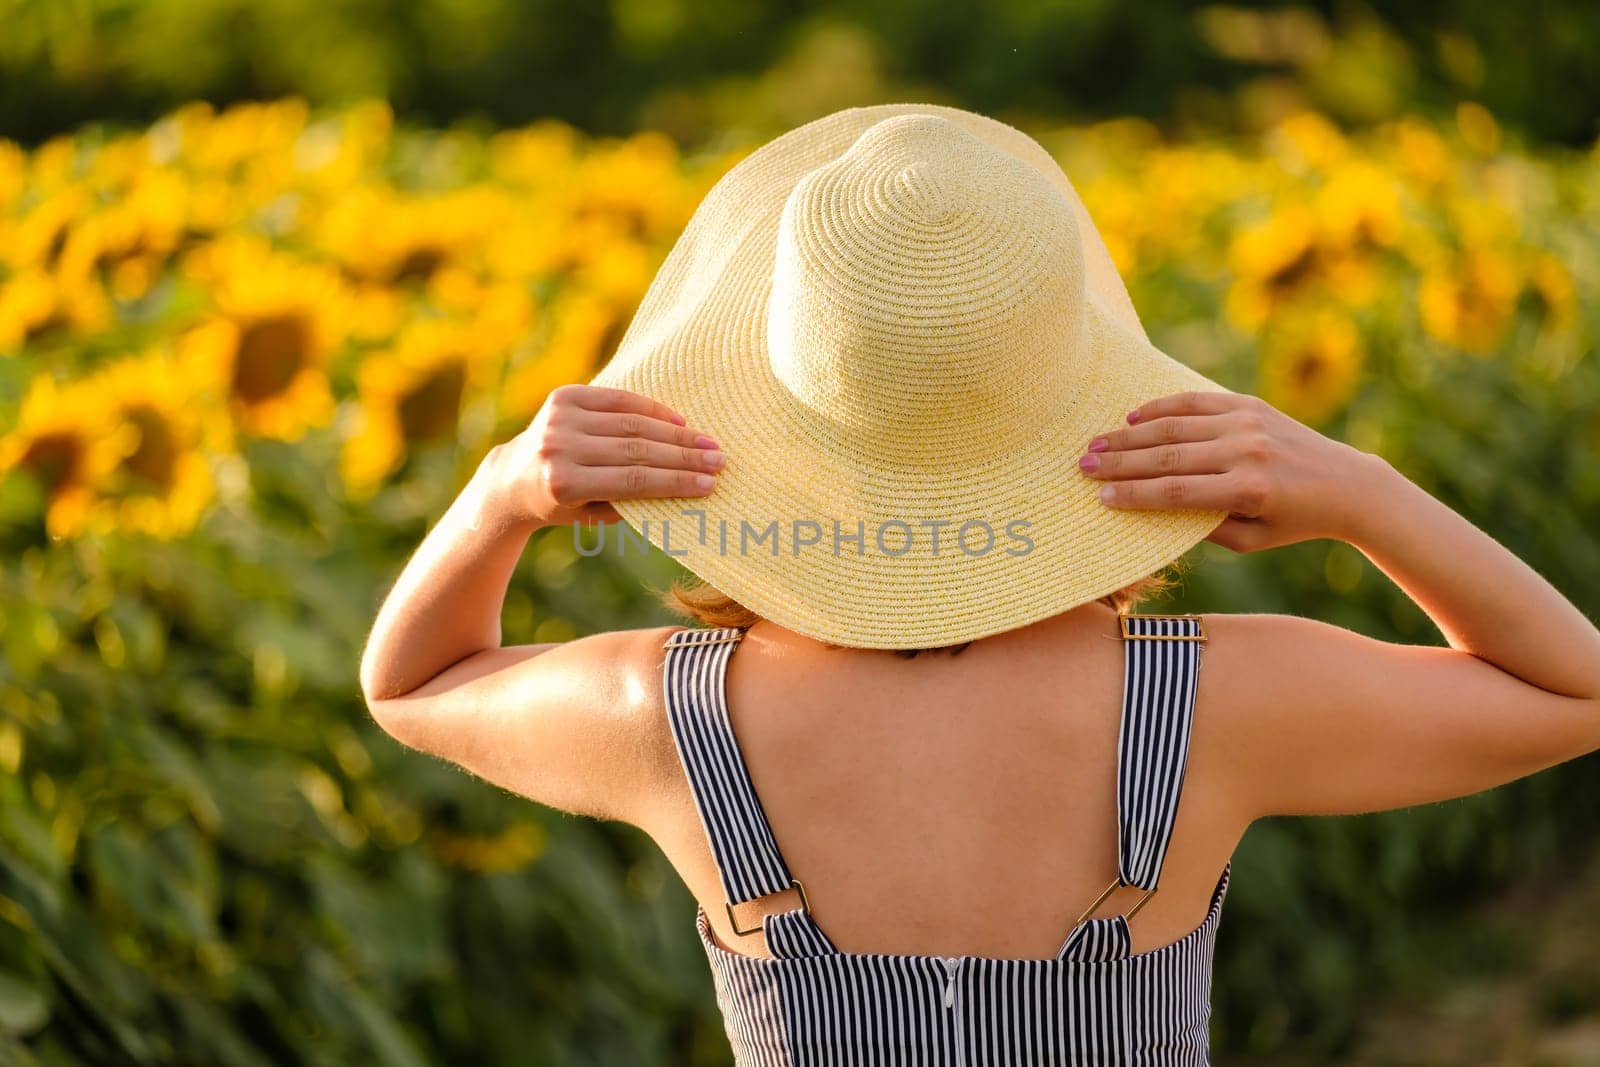 Lady holds straw hat with hands looking at sunflowers in agricultural field. Young woman poses for photo in countryside backside close view